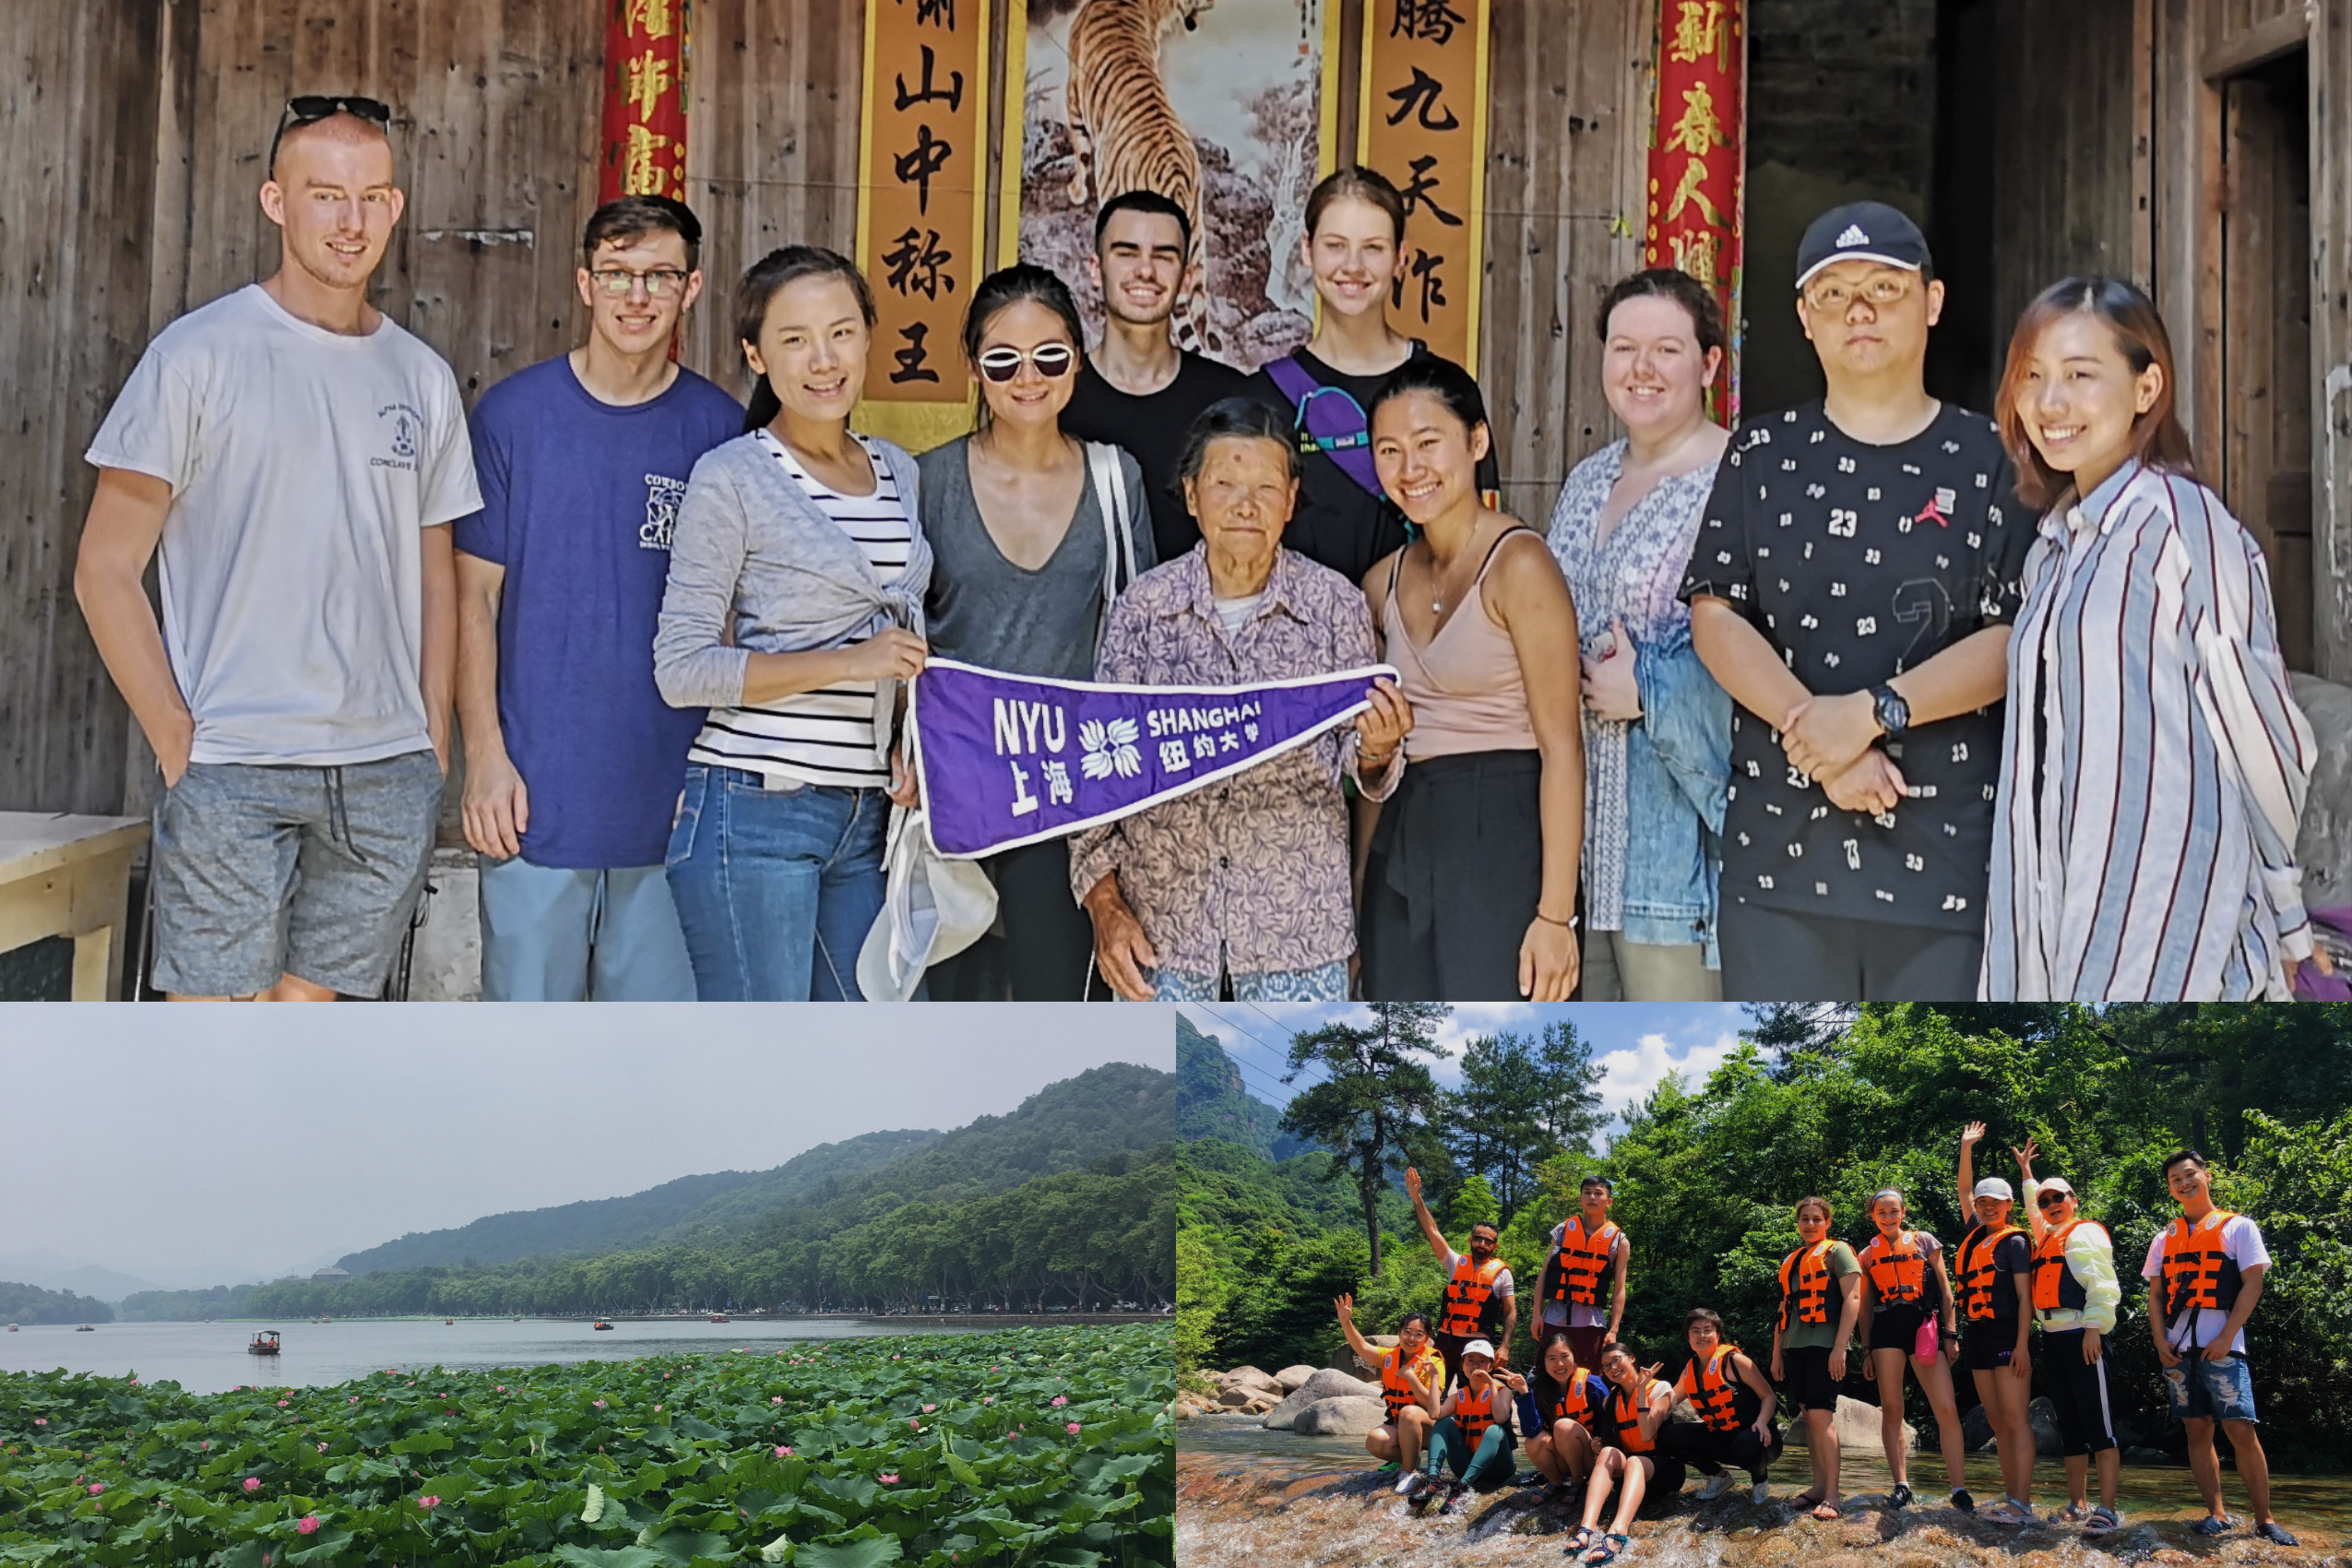 Pictures from faculty led trips to Huangshan and Hangzhou